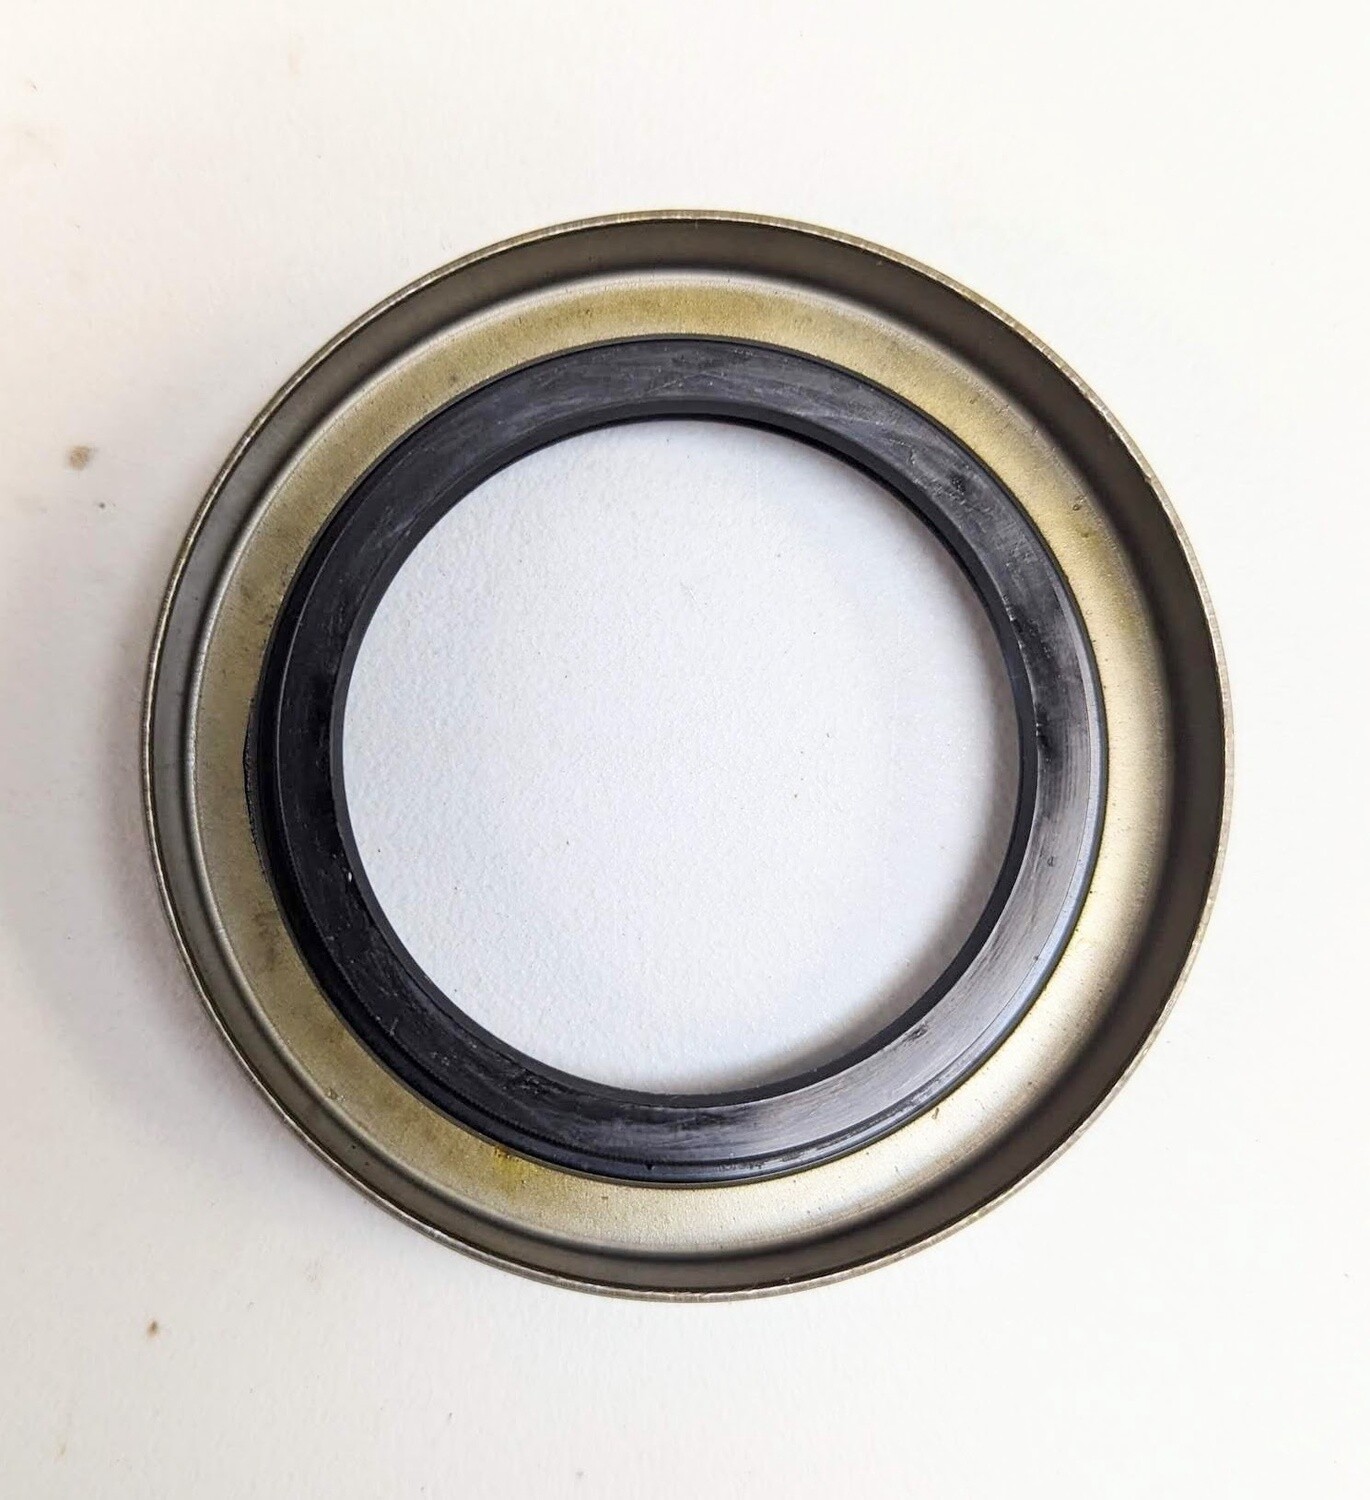 Replacement Axle Grease seal for 1" 3500# axle GS-1719DL